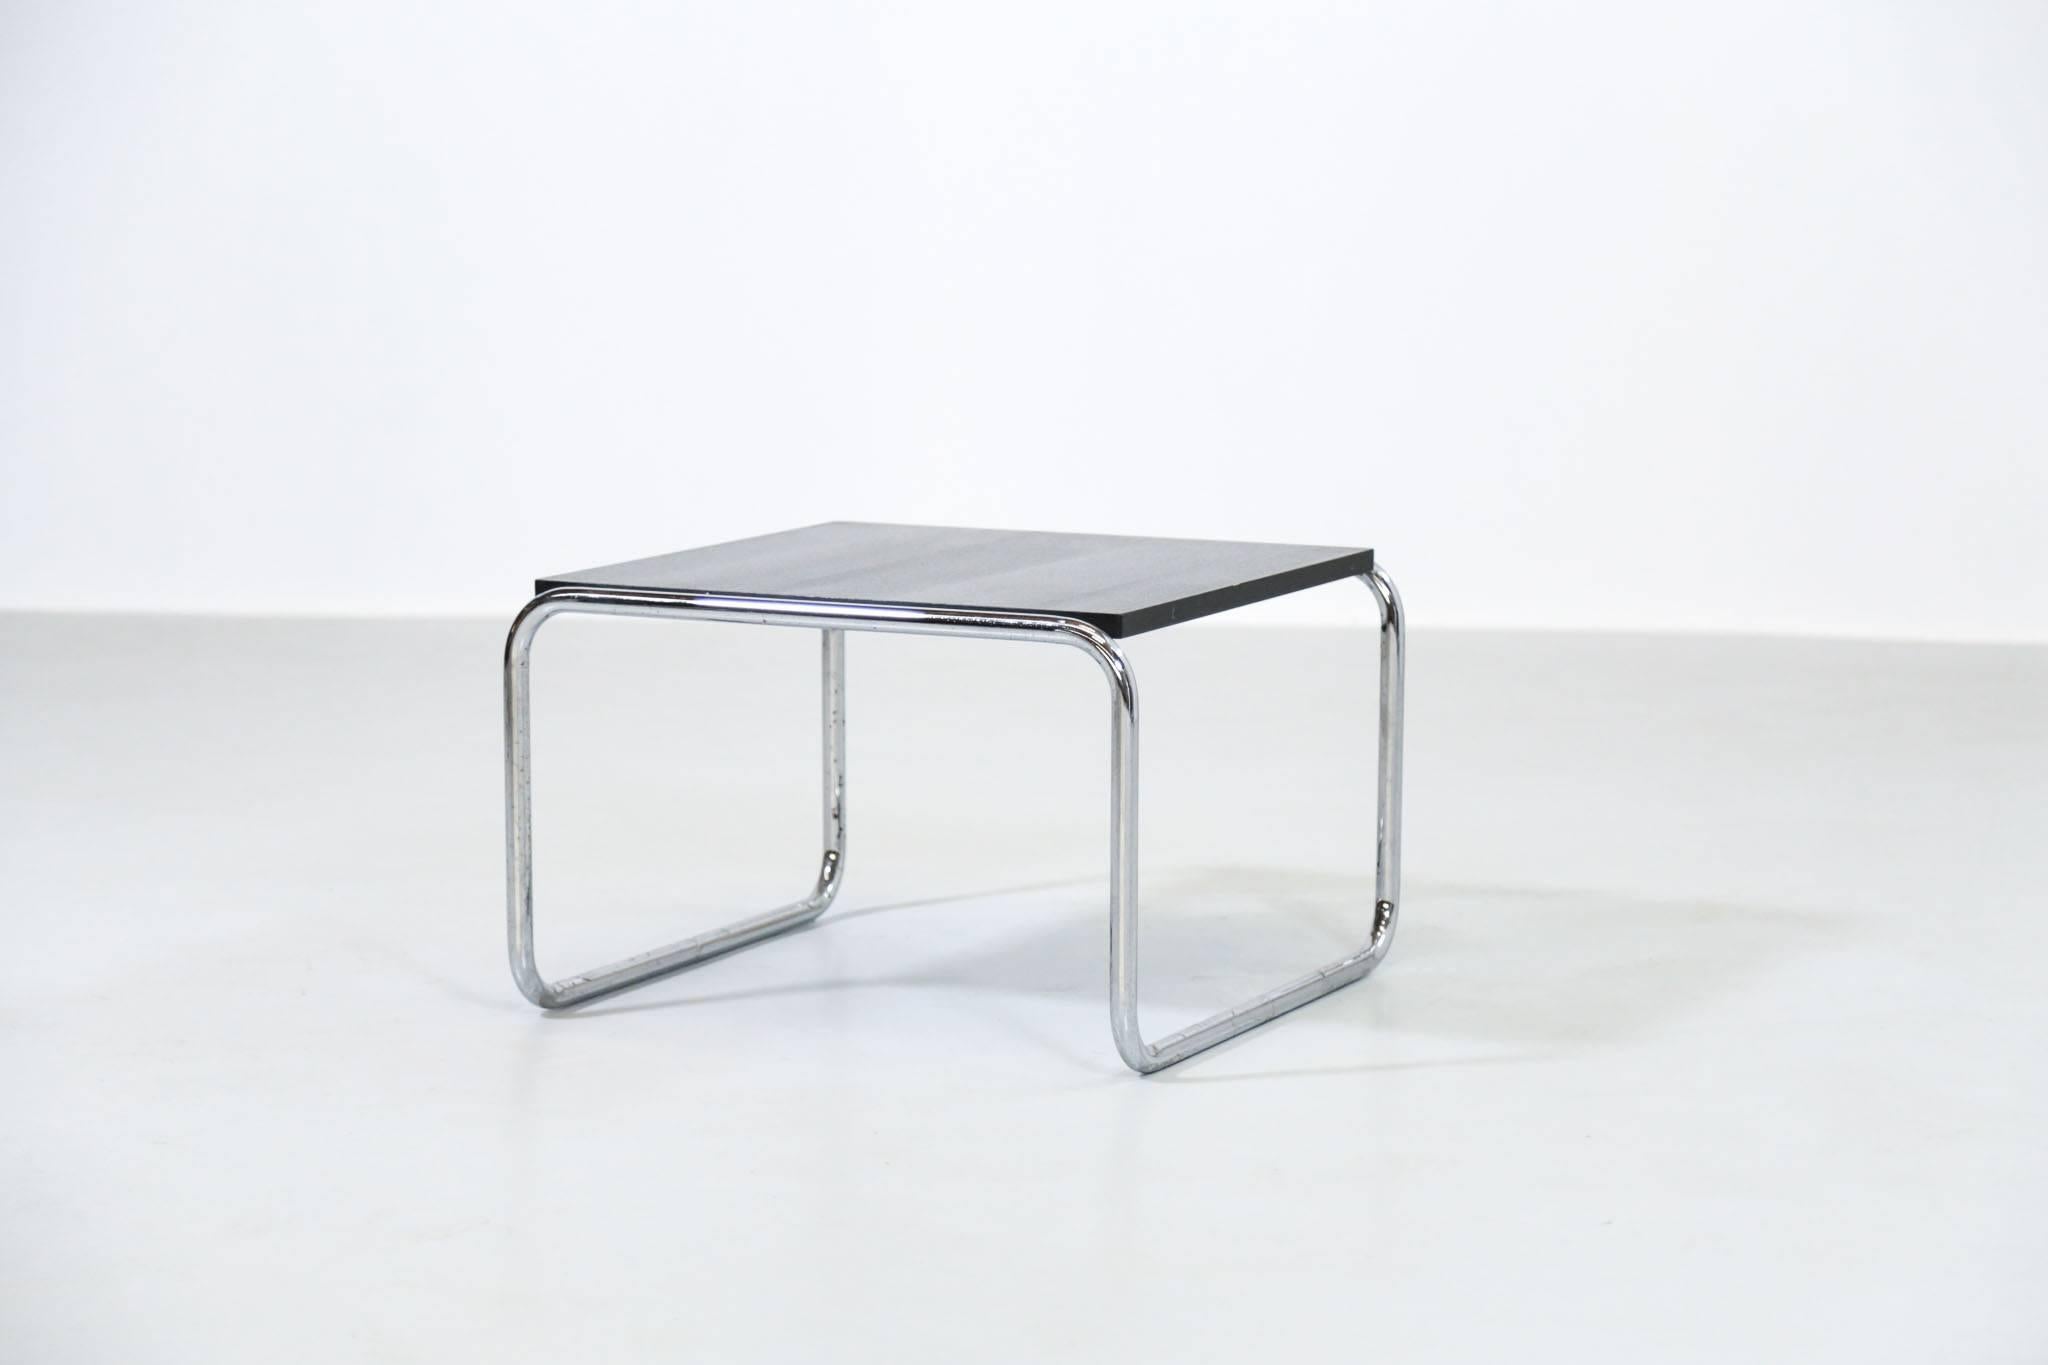 Mid-Century Modern Coffee/Side Table in the Style of Marcel Breuer Bauhaus Design, Germany For Sale